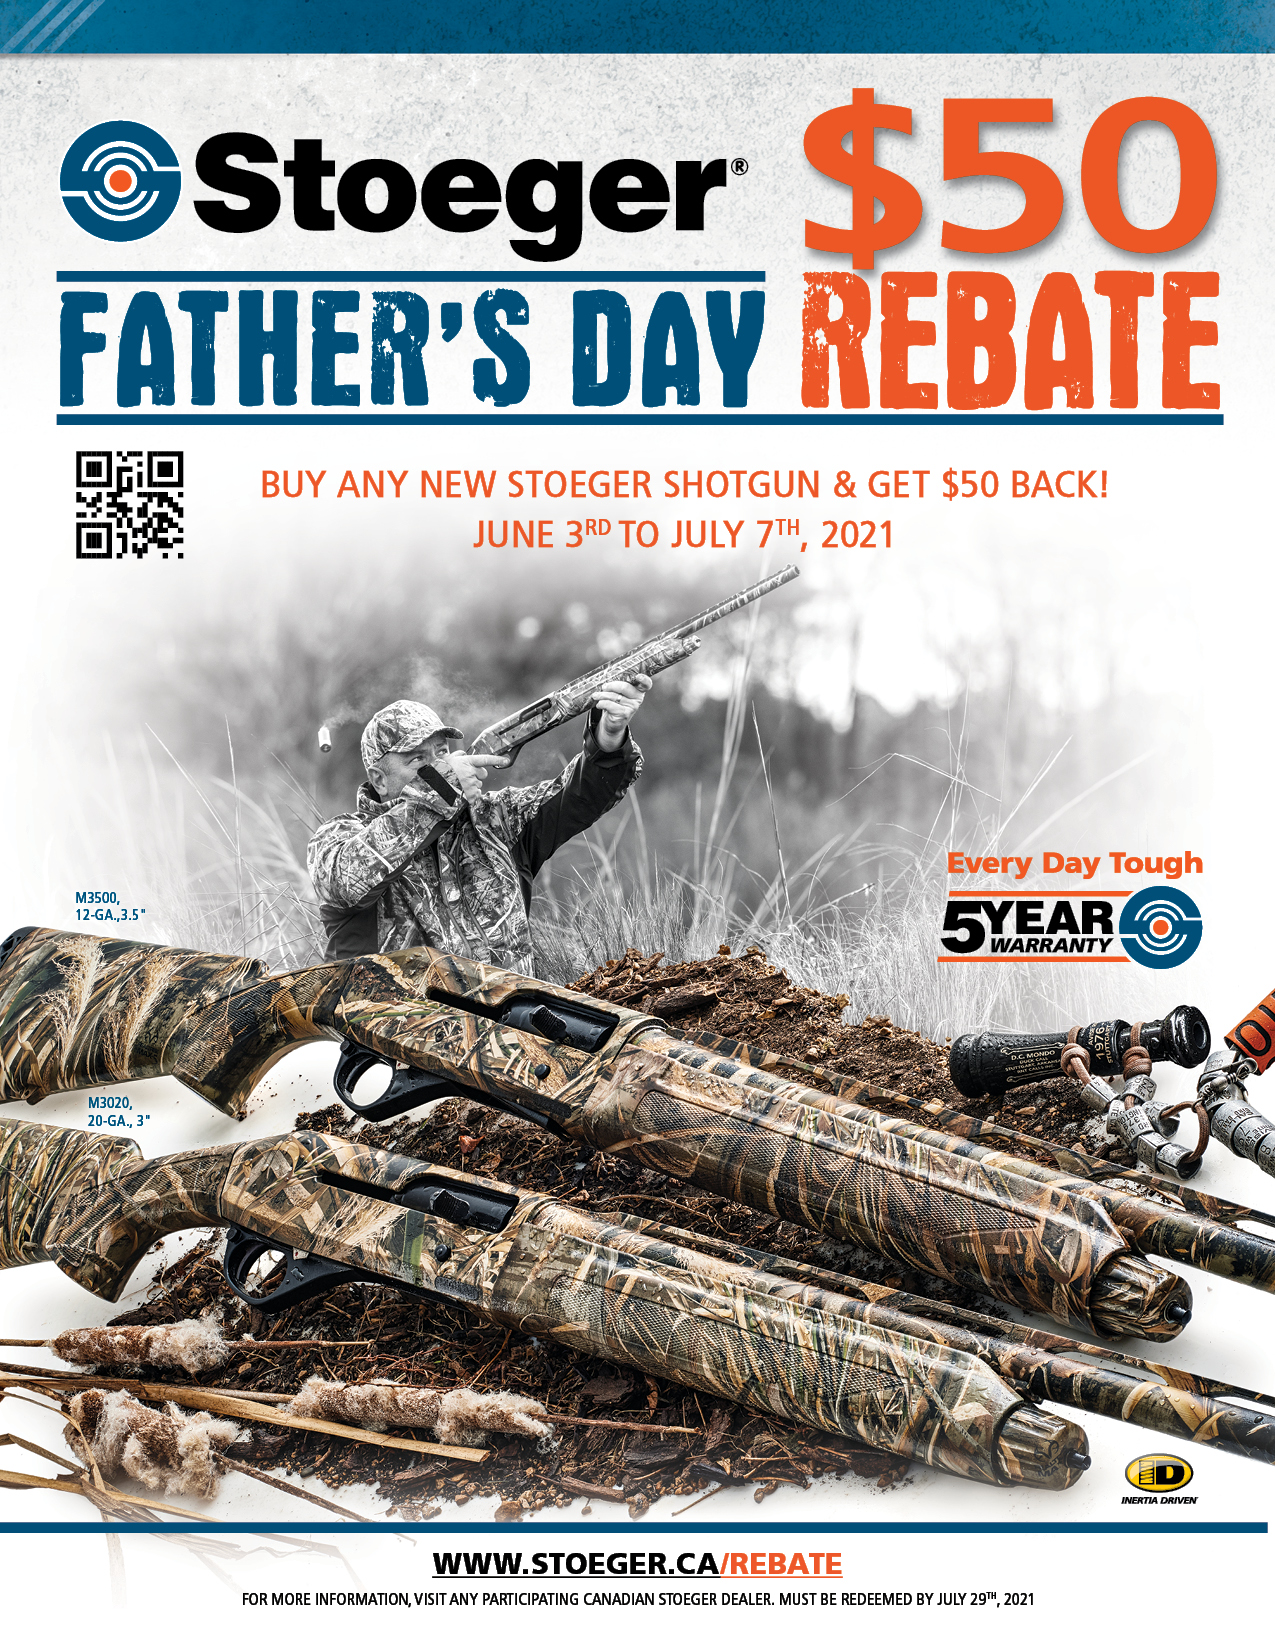 stoeger-father-s-day-rebate-50-off-shotguns-stoeger-canada